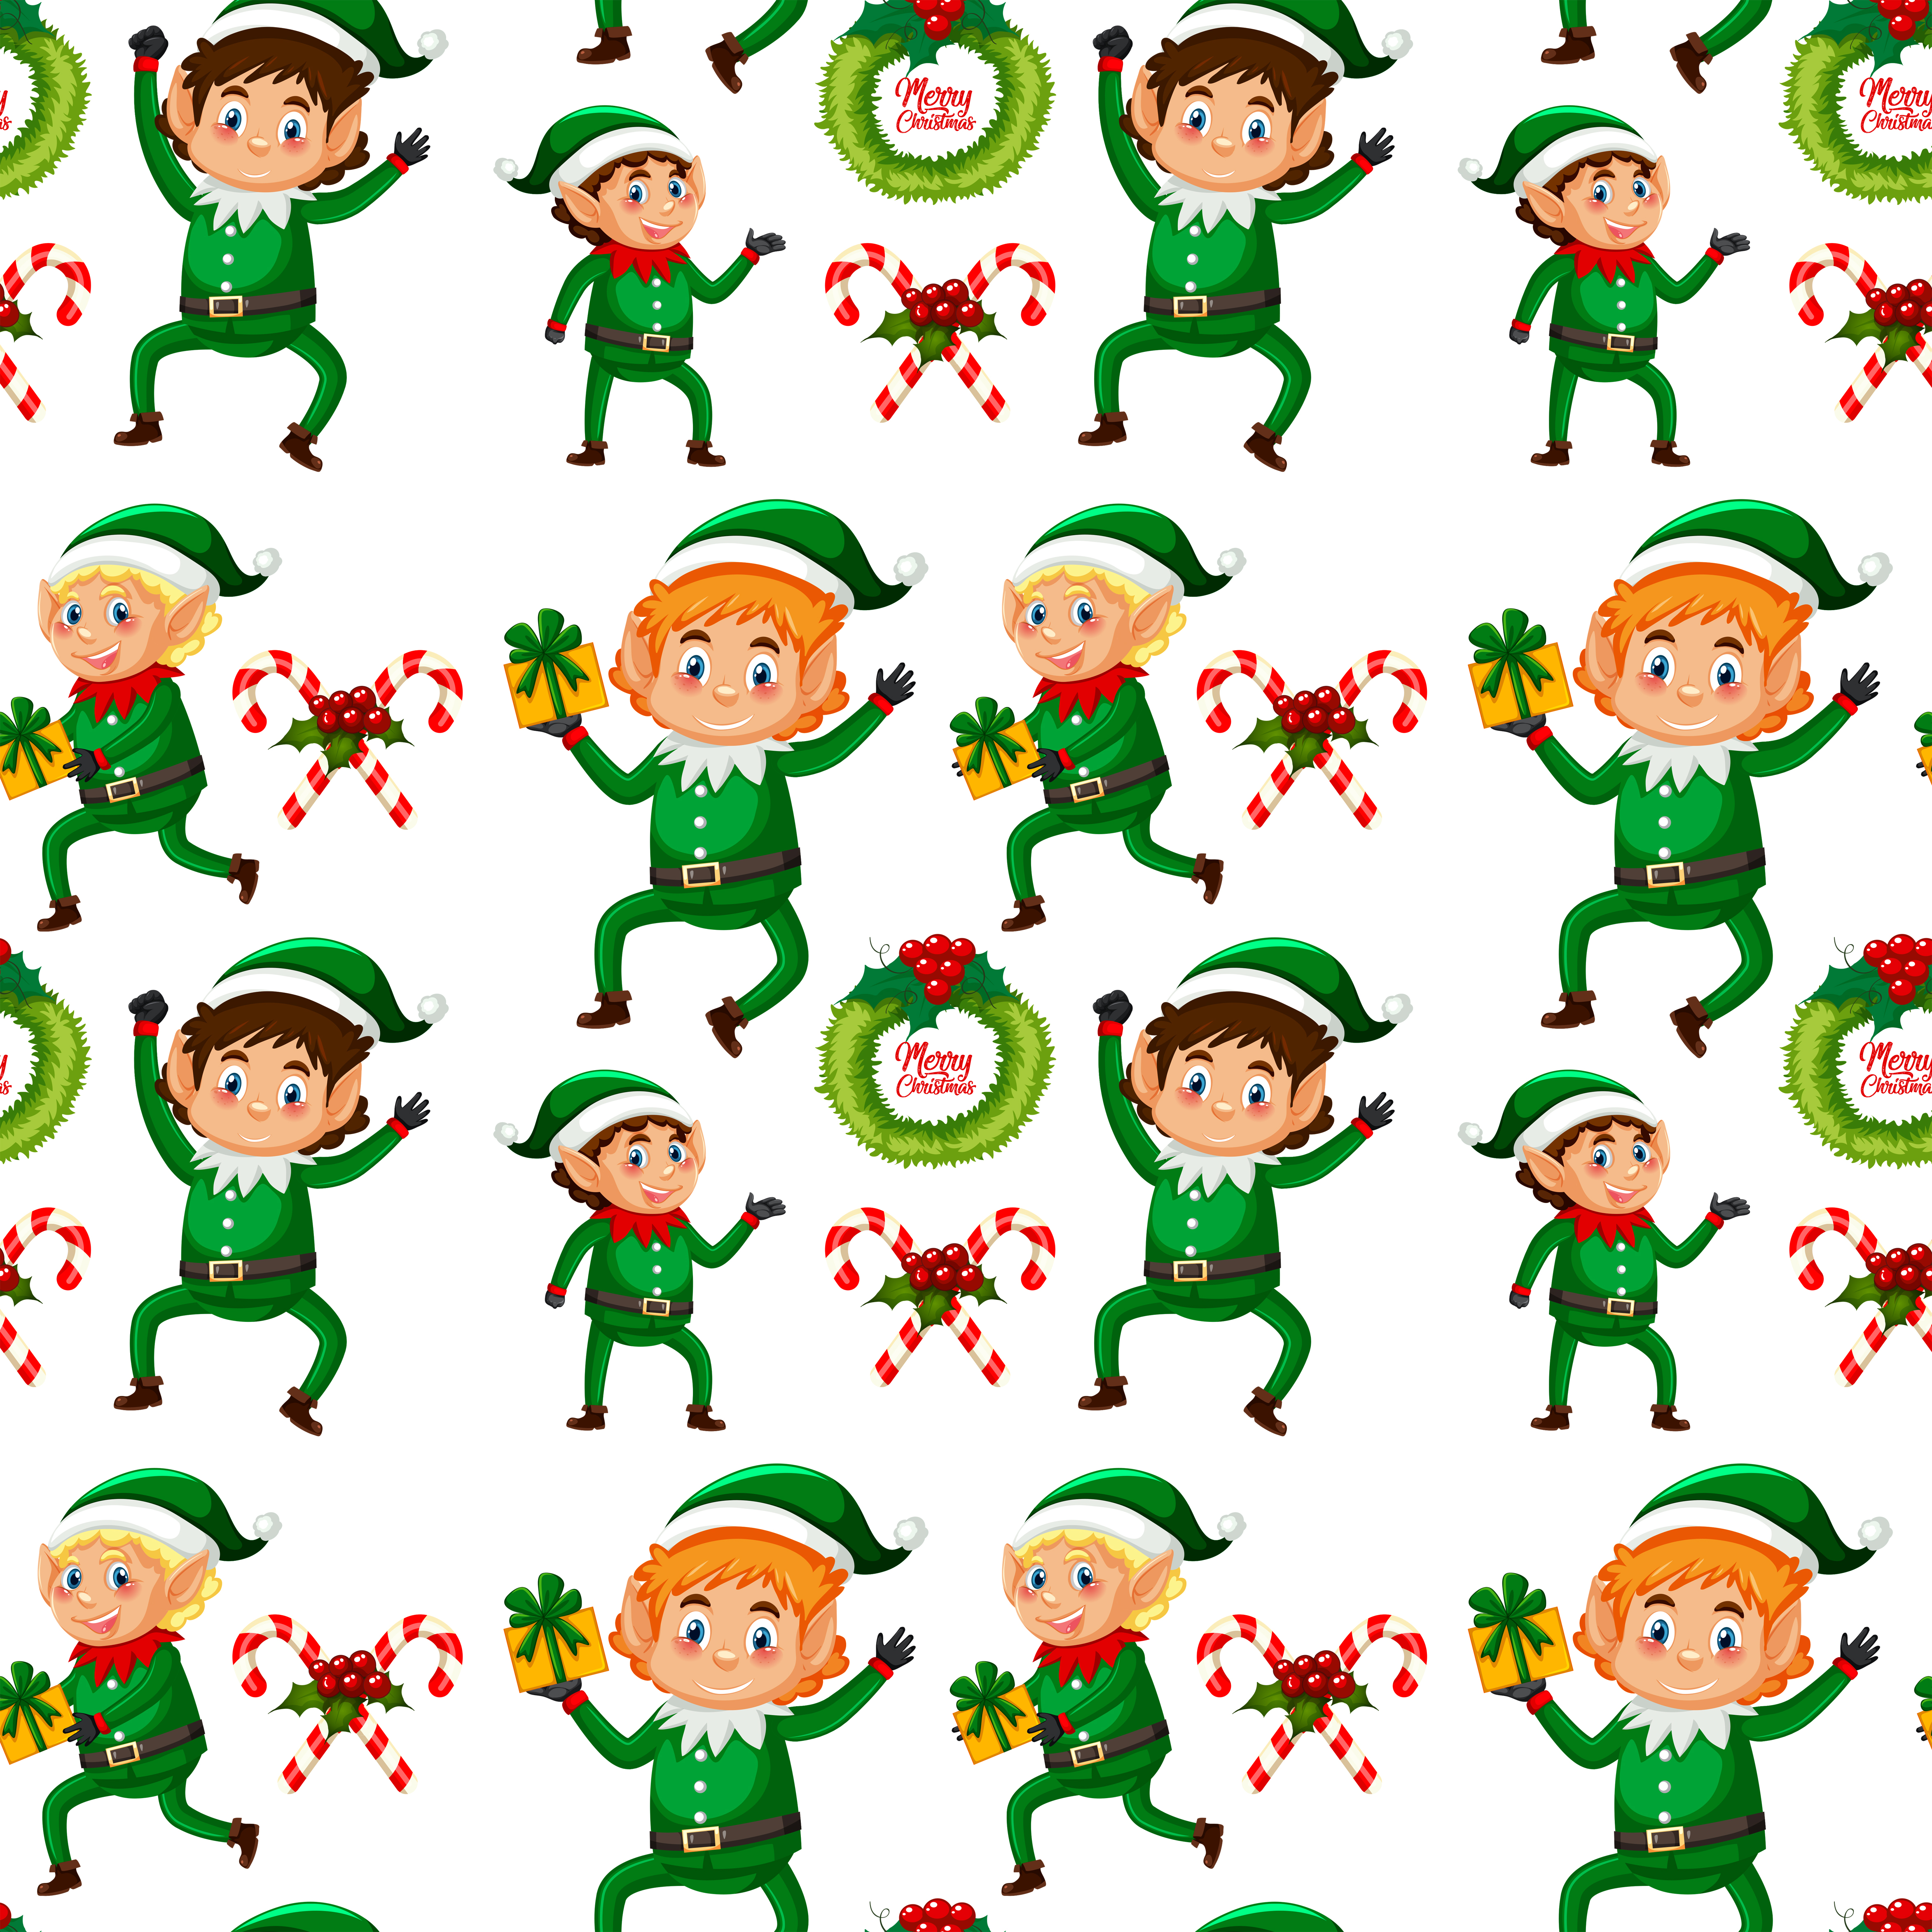 Download Christmas elf seamless background - Download Free Vectors ...